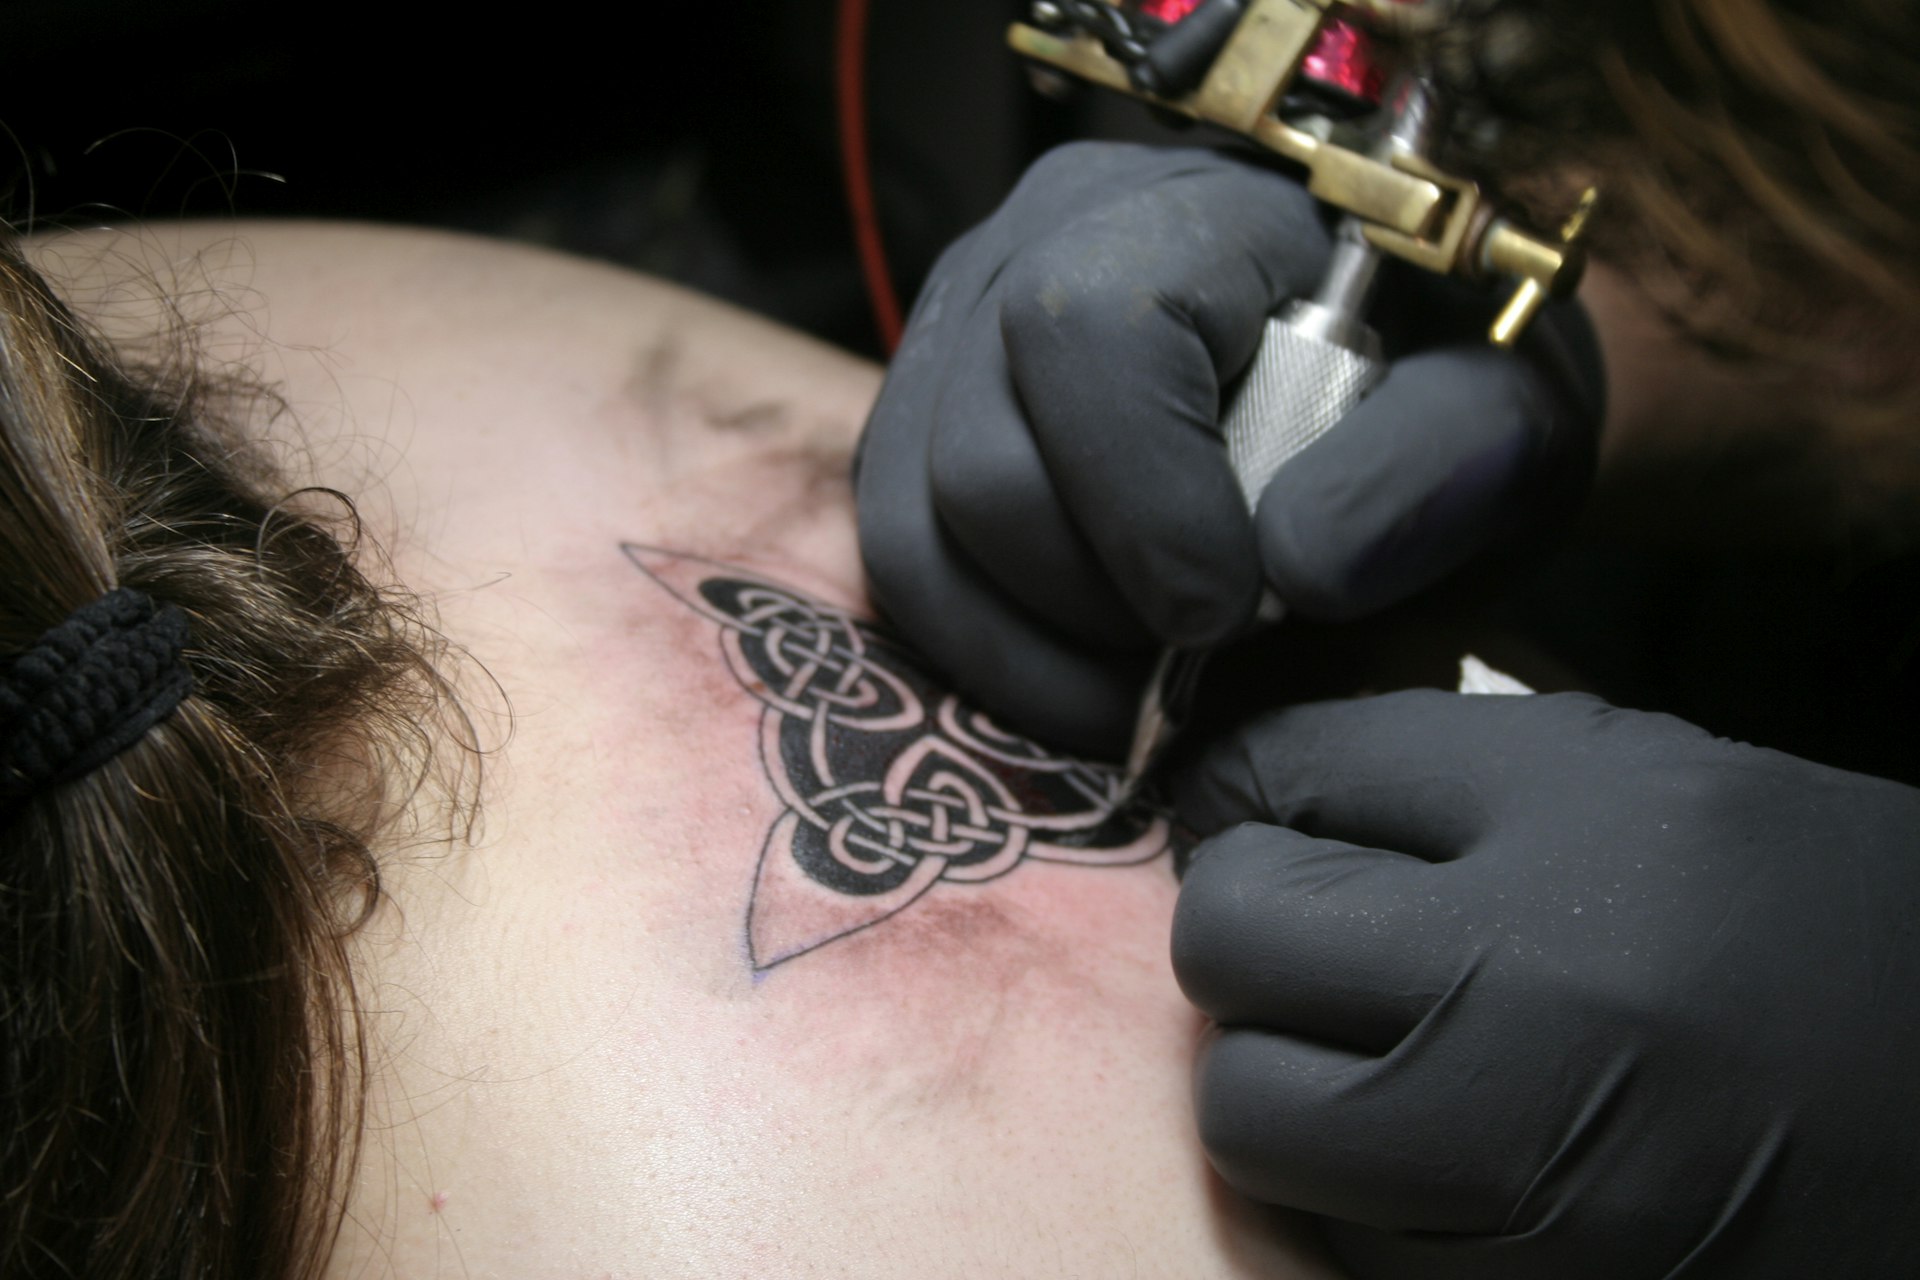 Closeup of a tattoo artist wearing black gloves and holding a tattoo machine as they ink a Celtic symbol on the back of a person